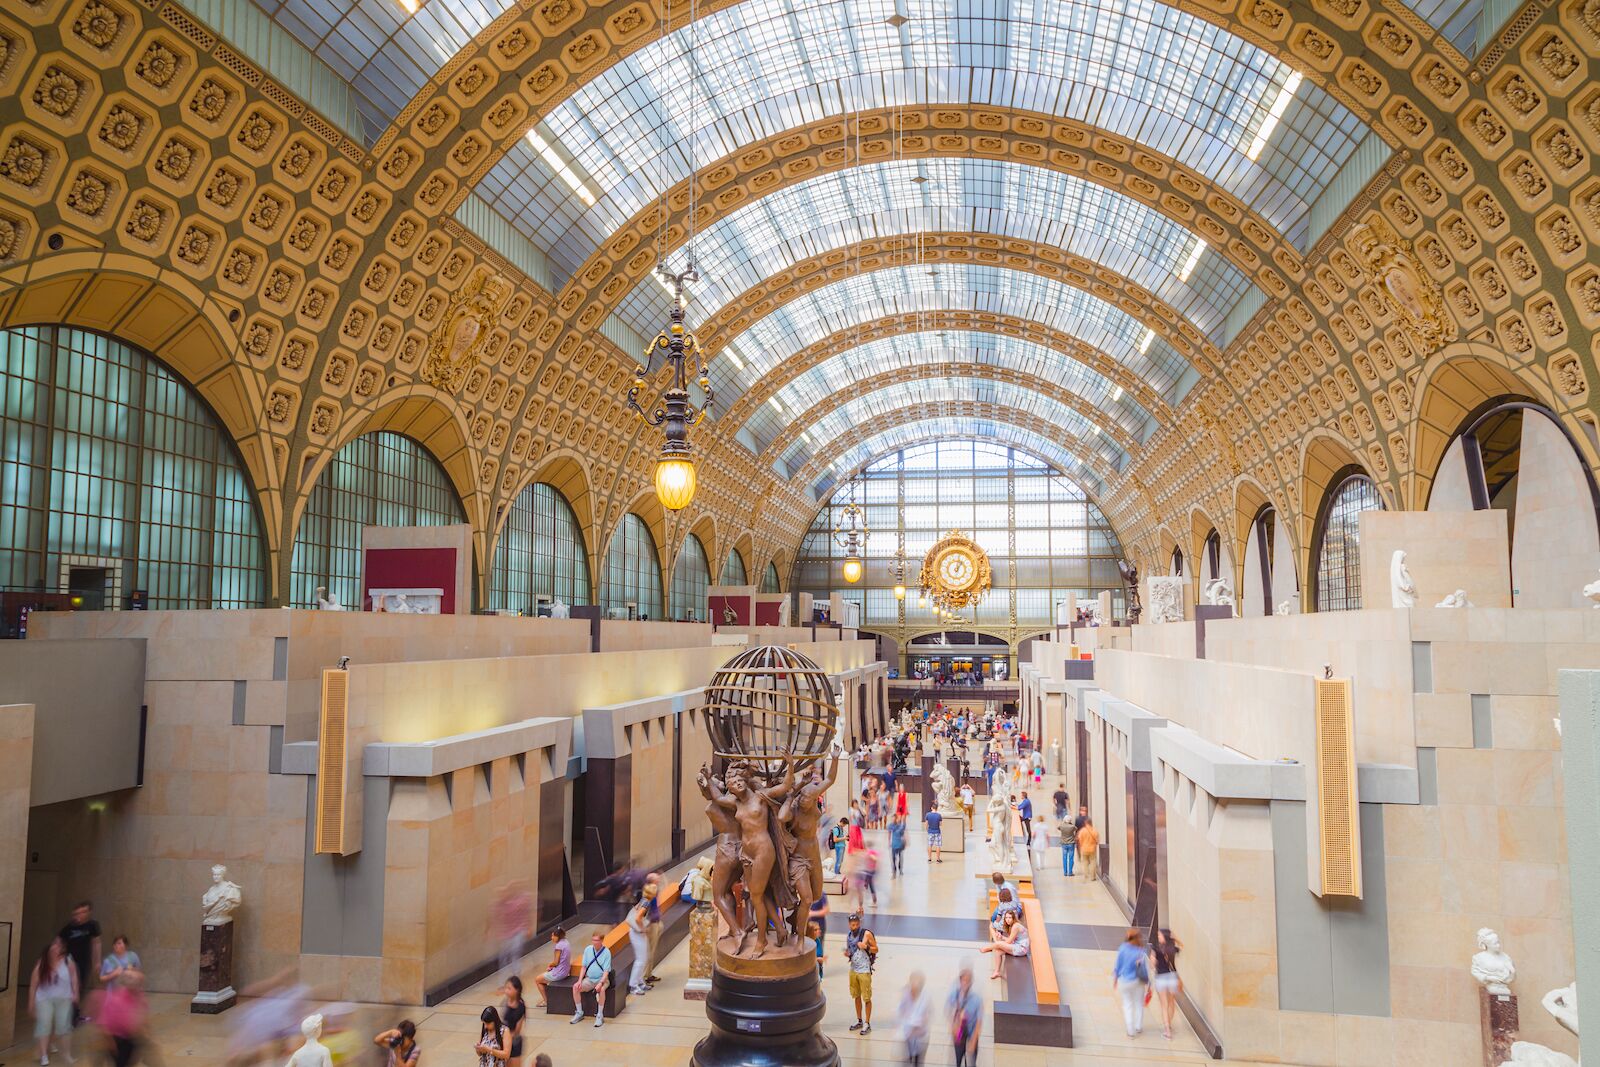 Inside the Musée d'Orsay